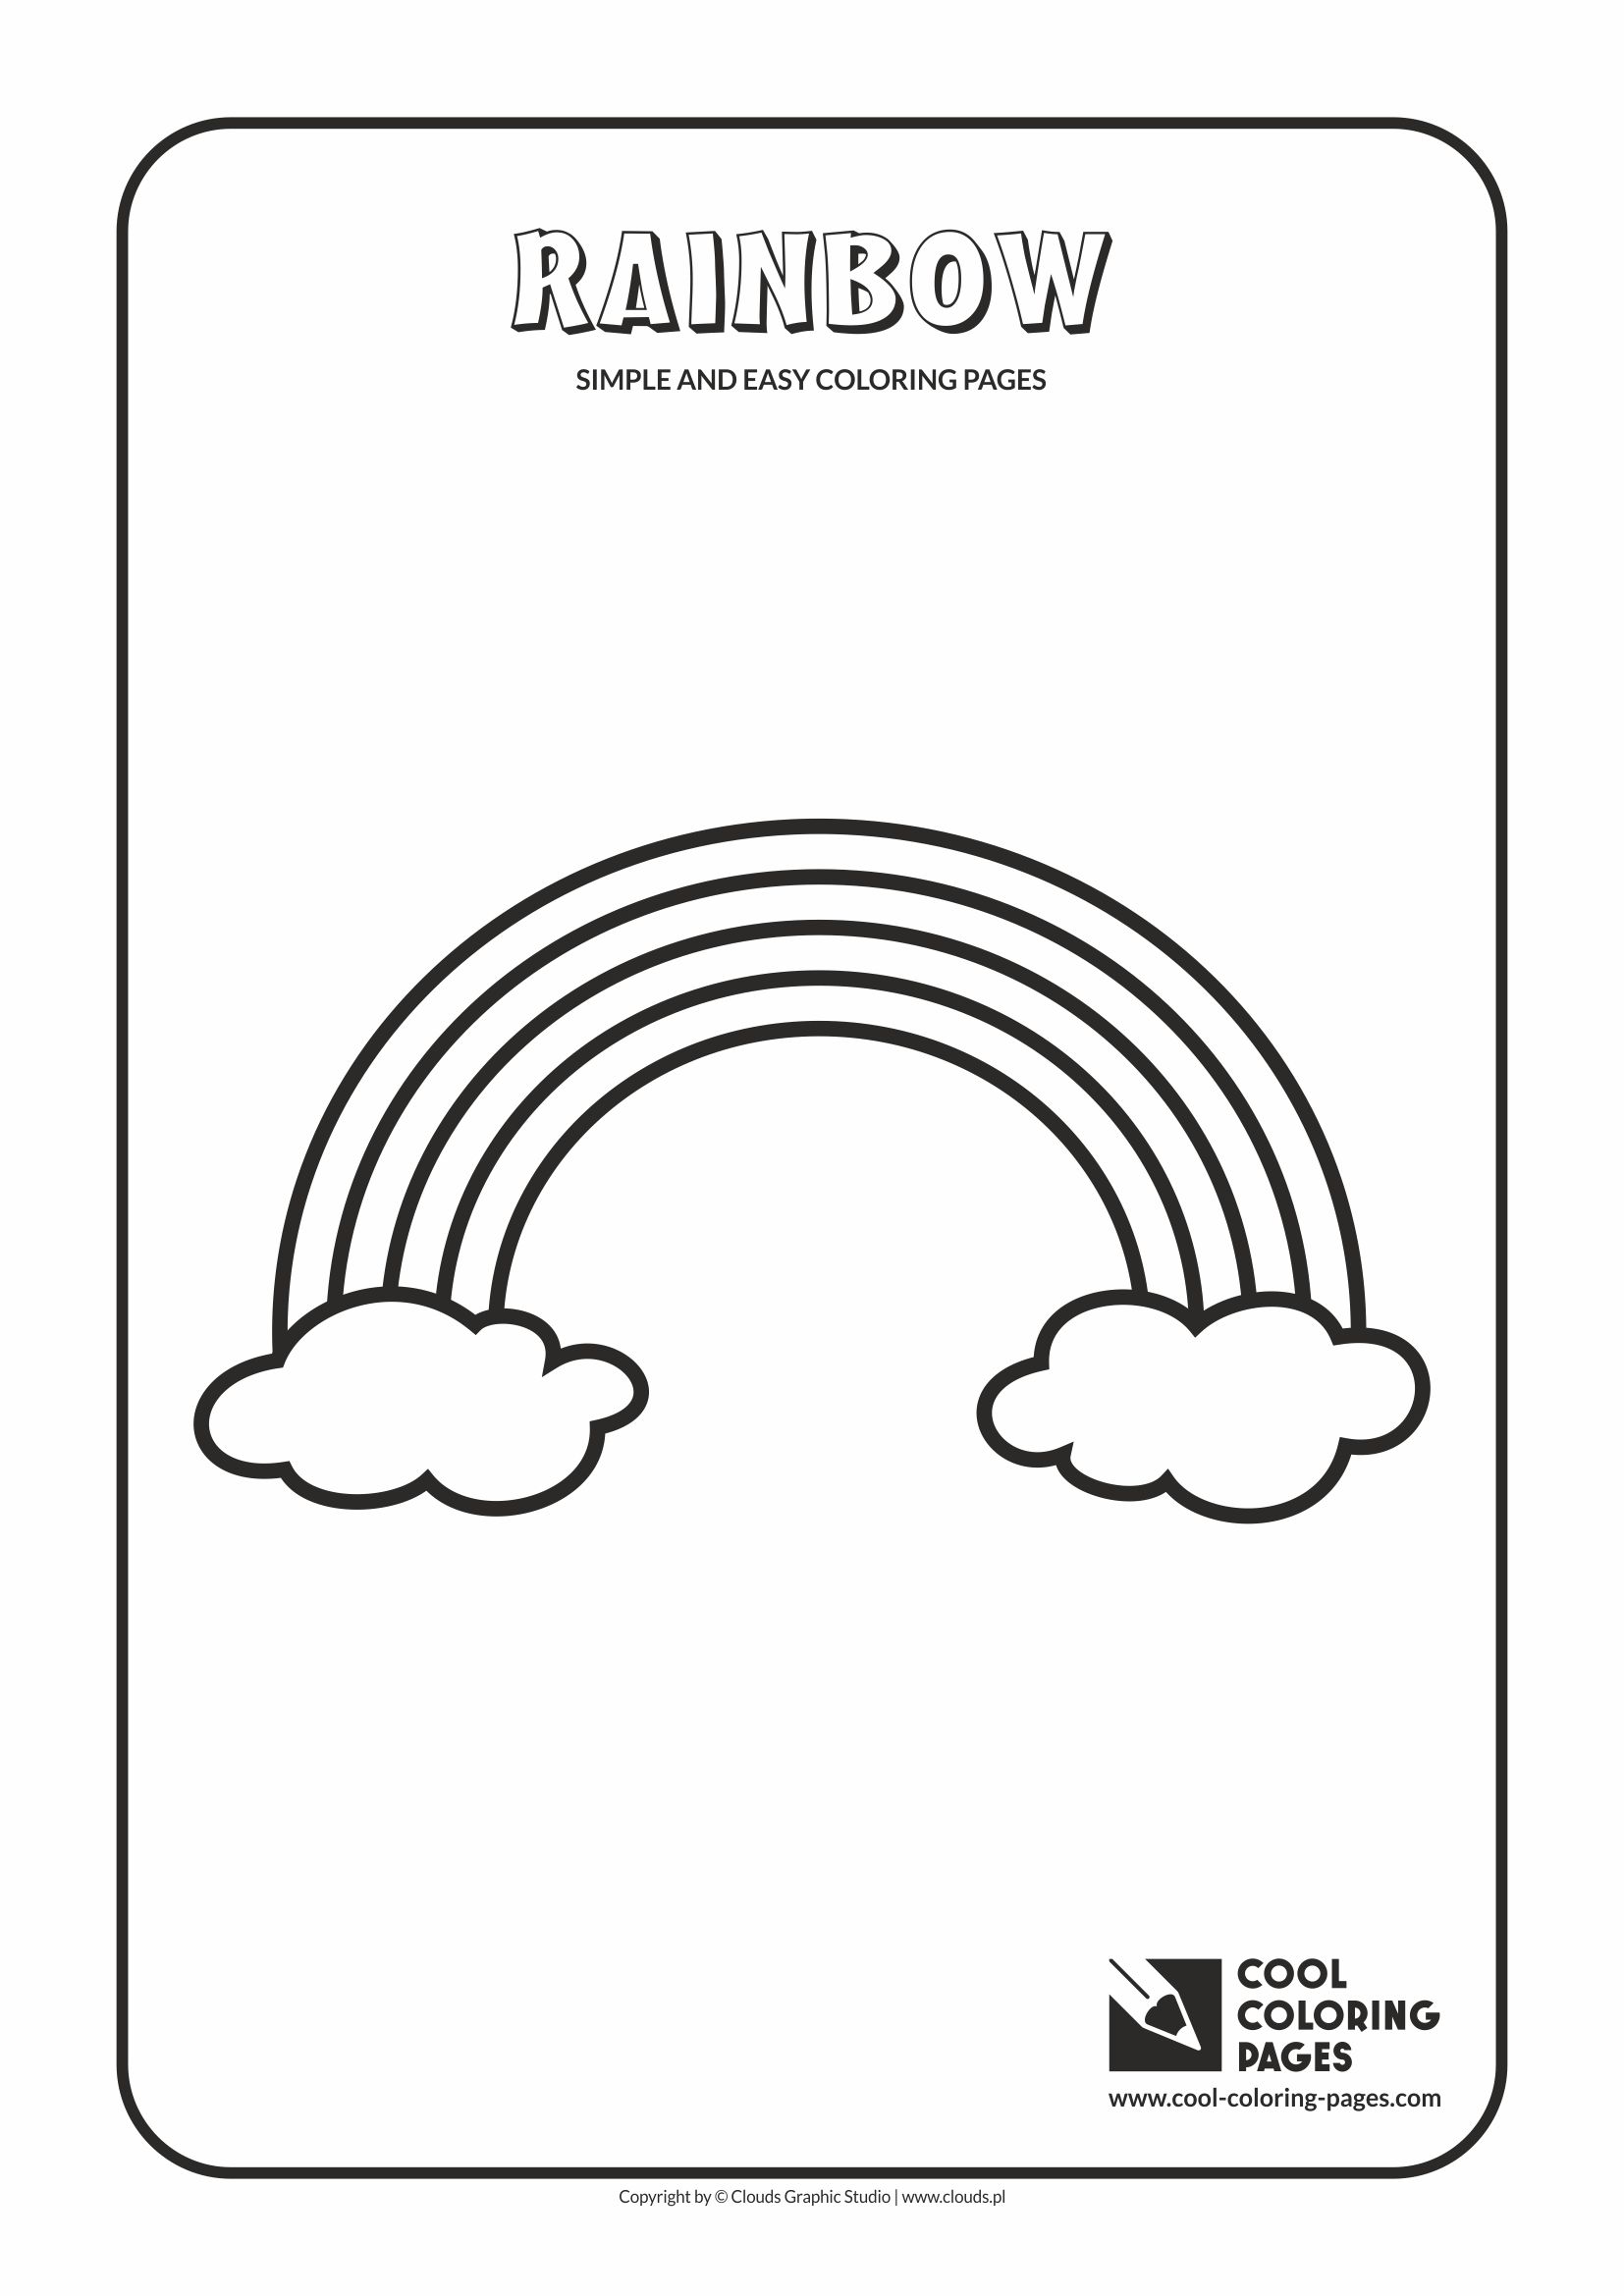 Simple and easy coloring pages for toddlers - Rainbow